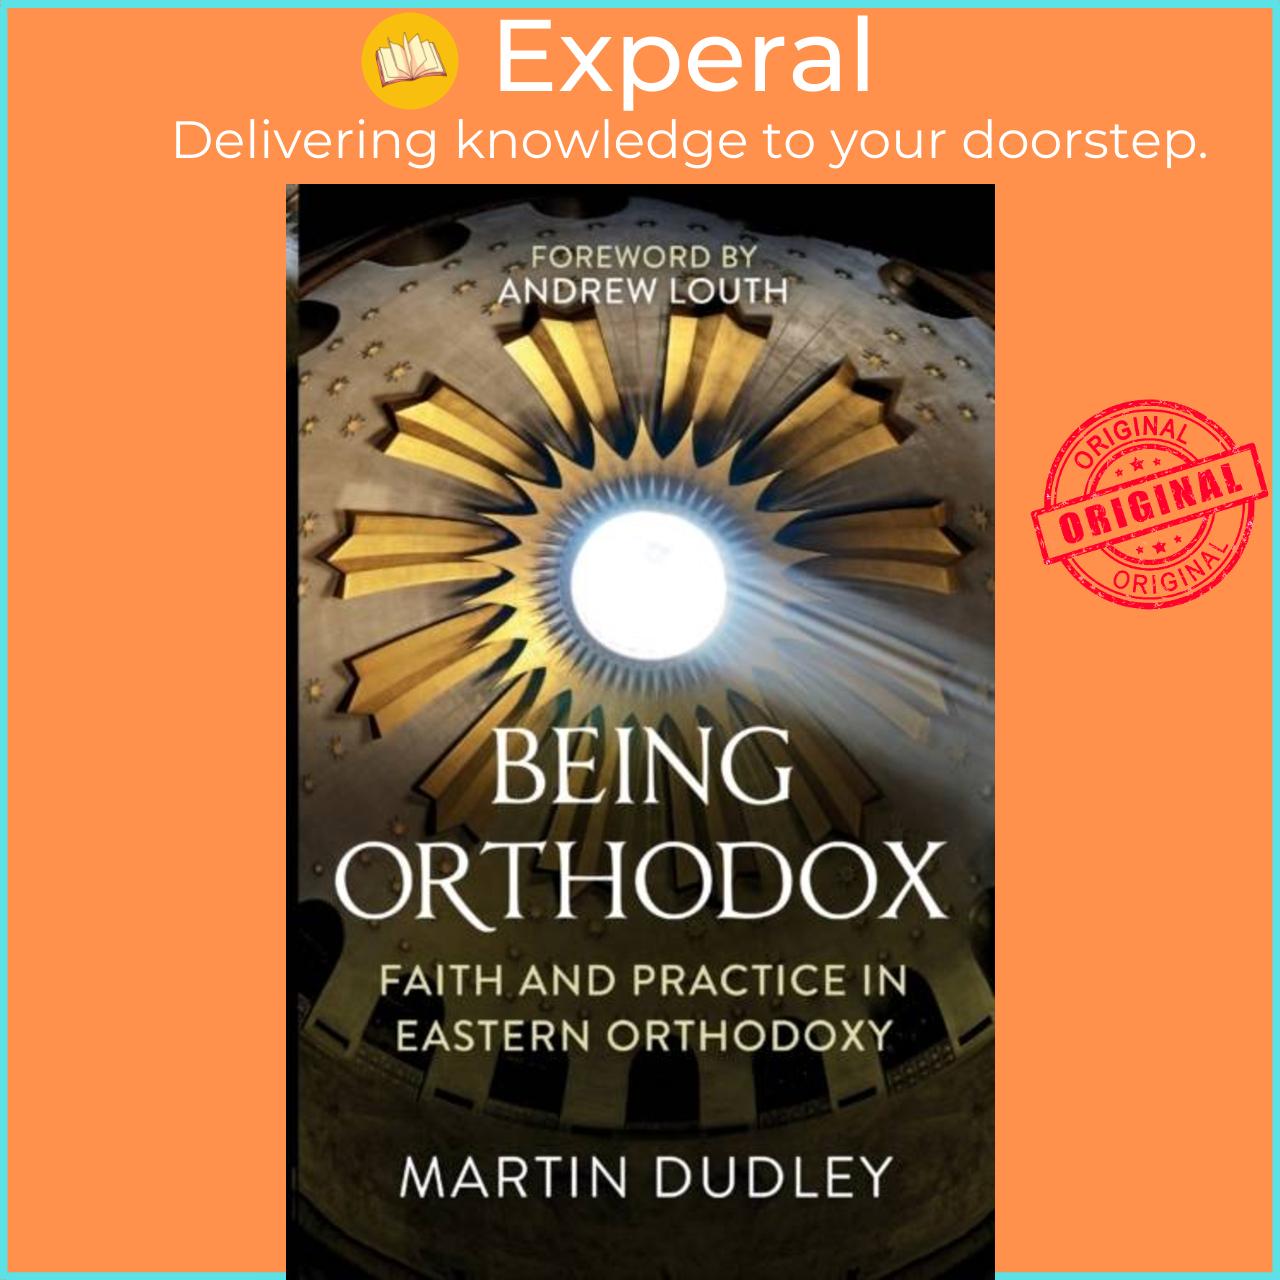 Sách - Being Orthodox - Faith and Practice in Eastern Orthodoxy by Martin Dudley (UK edition, paperback)